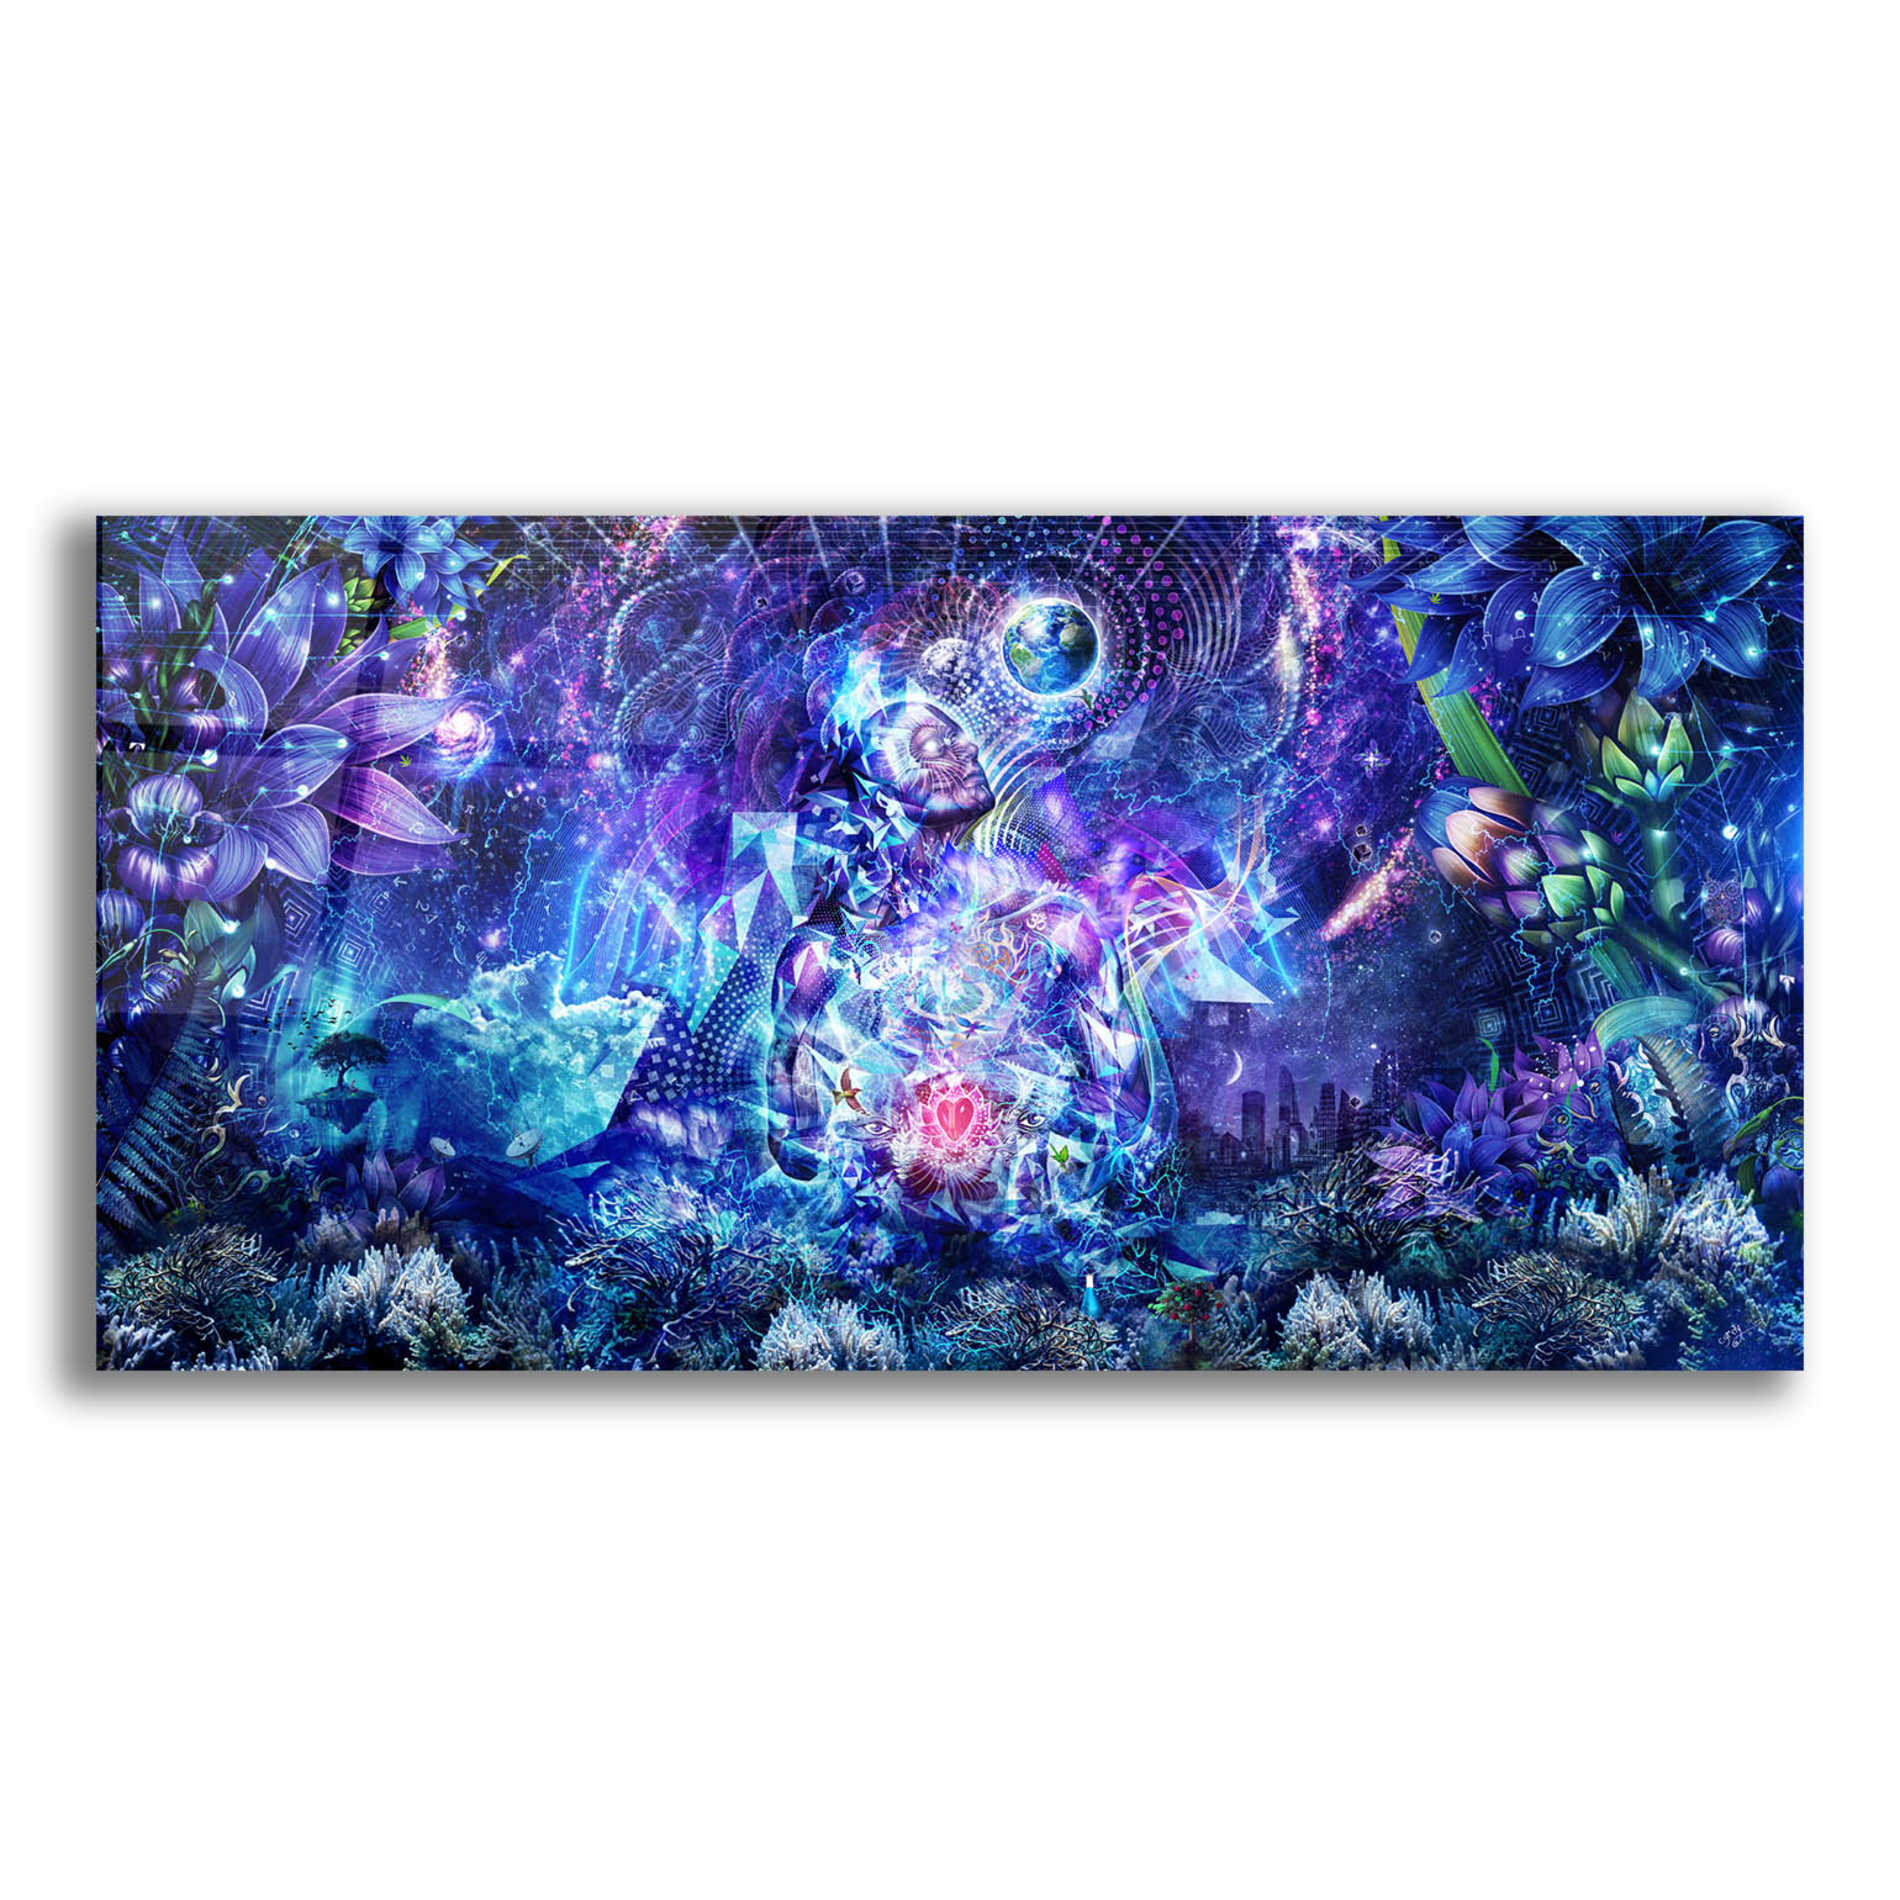 Epic Art 'Transcension' by Cameron Gray, Acrylic Glass Wall Art,24x12